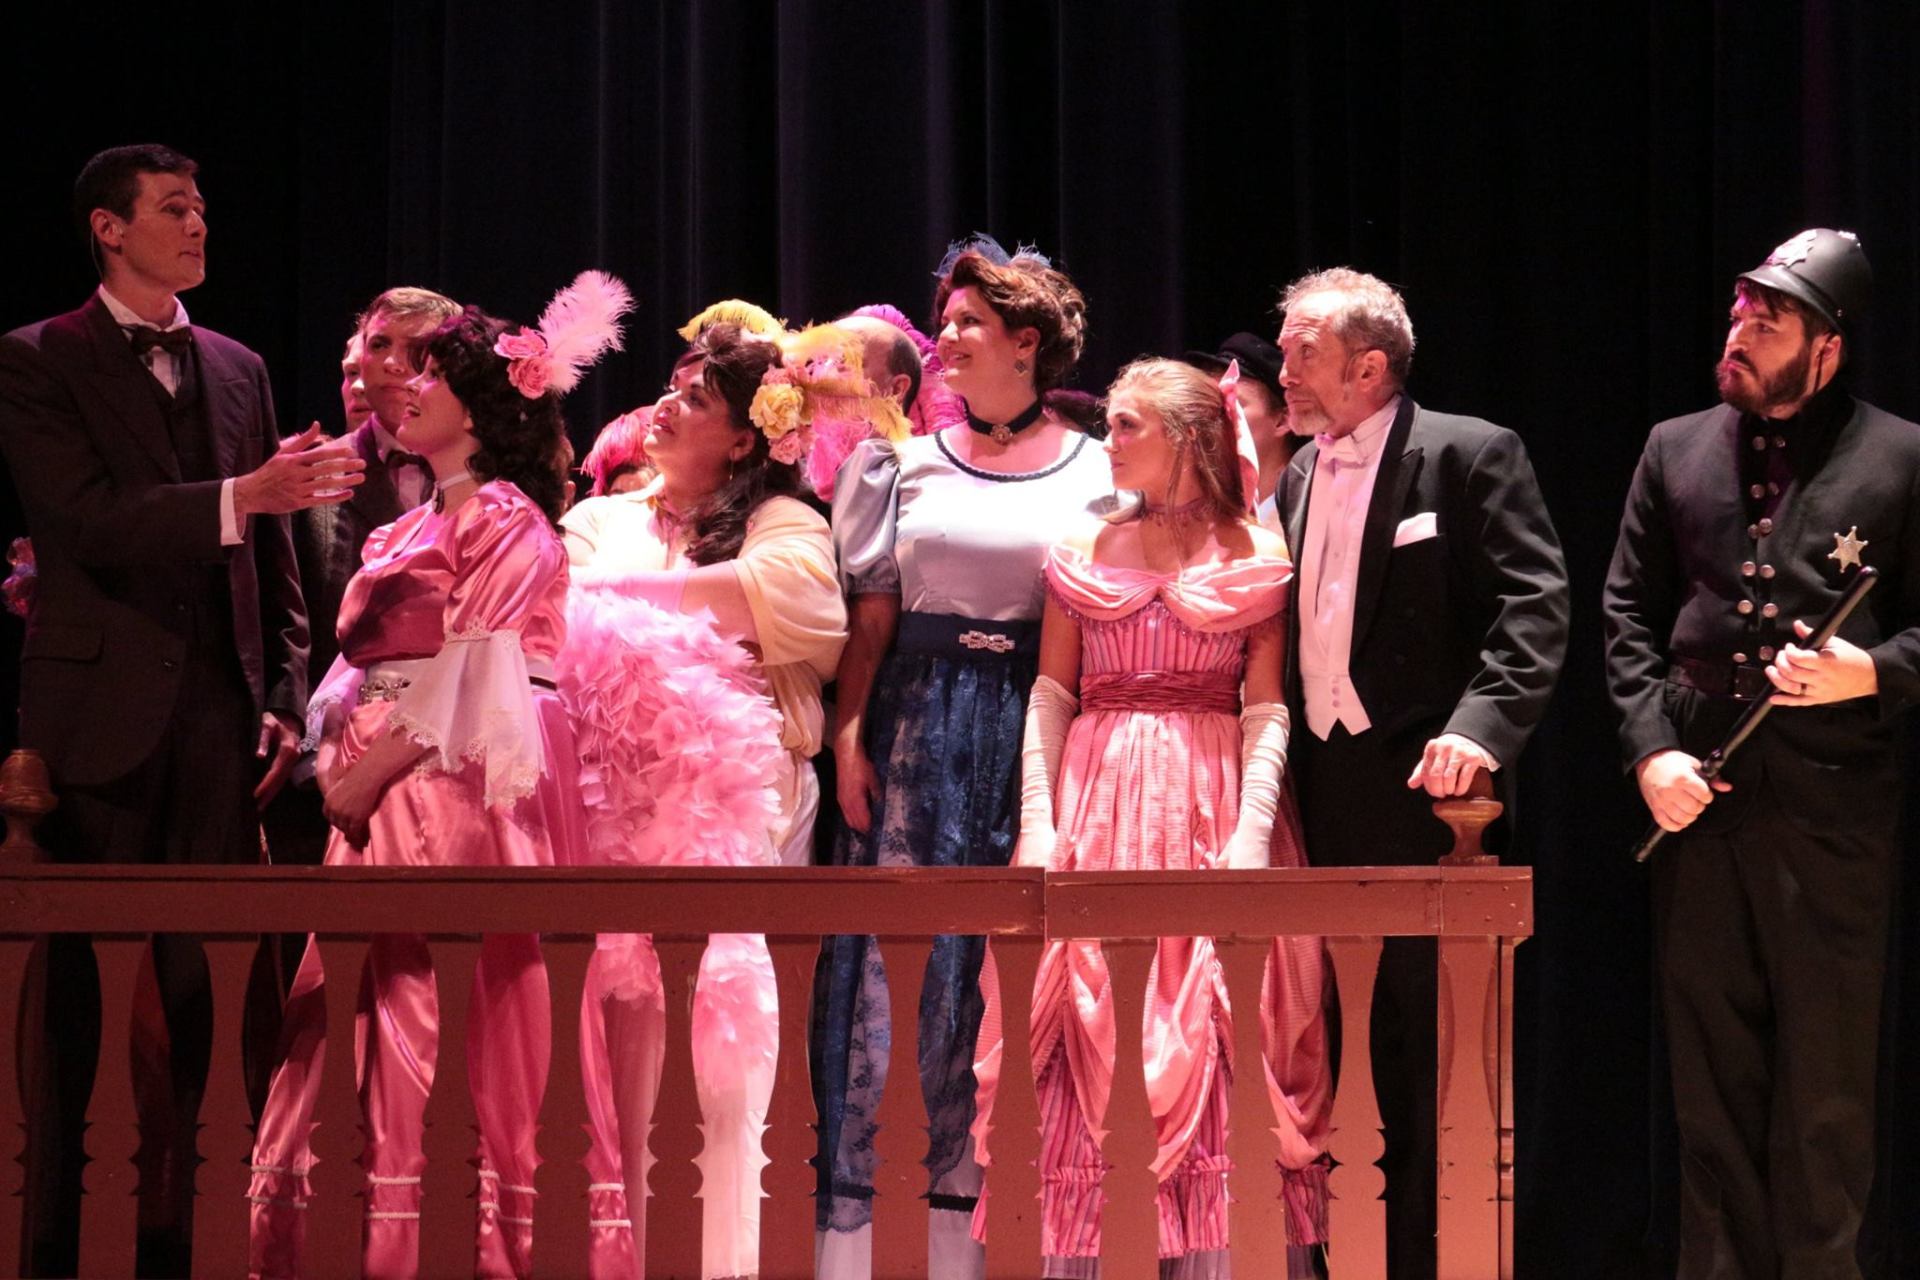 Danette, center in the white and blue dress, appears in “Hello, Dolly!”